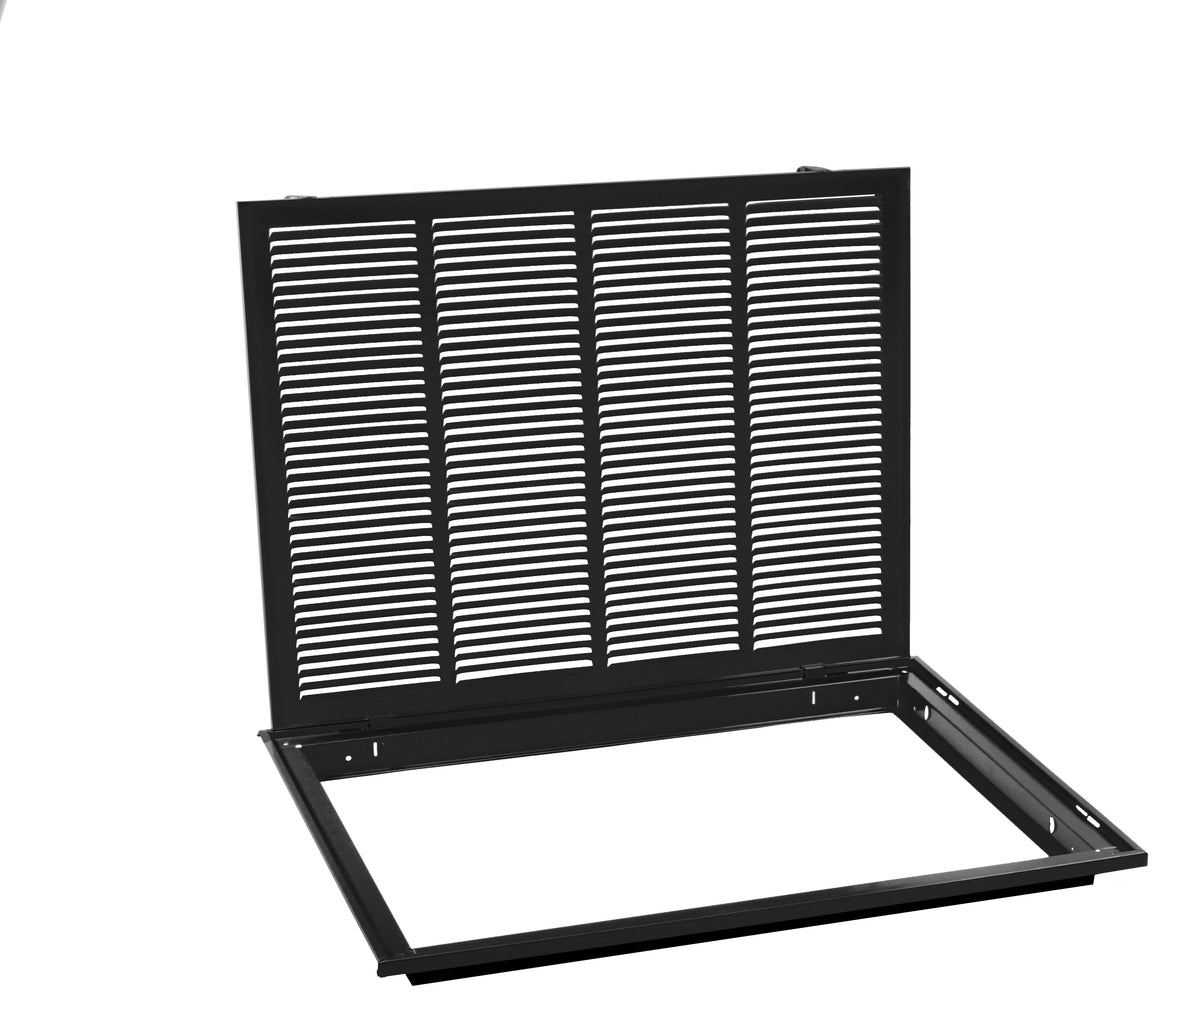 24&quot; X 20&quot; Steel Return Air Filter Grille for 1&quot; Filter - Removable Frame - Black - [Outer Dimensions: 26 5/8&quot; X 22 5/8&quot;]